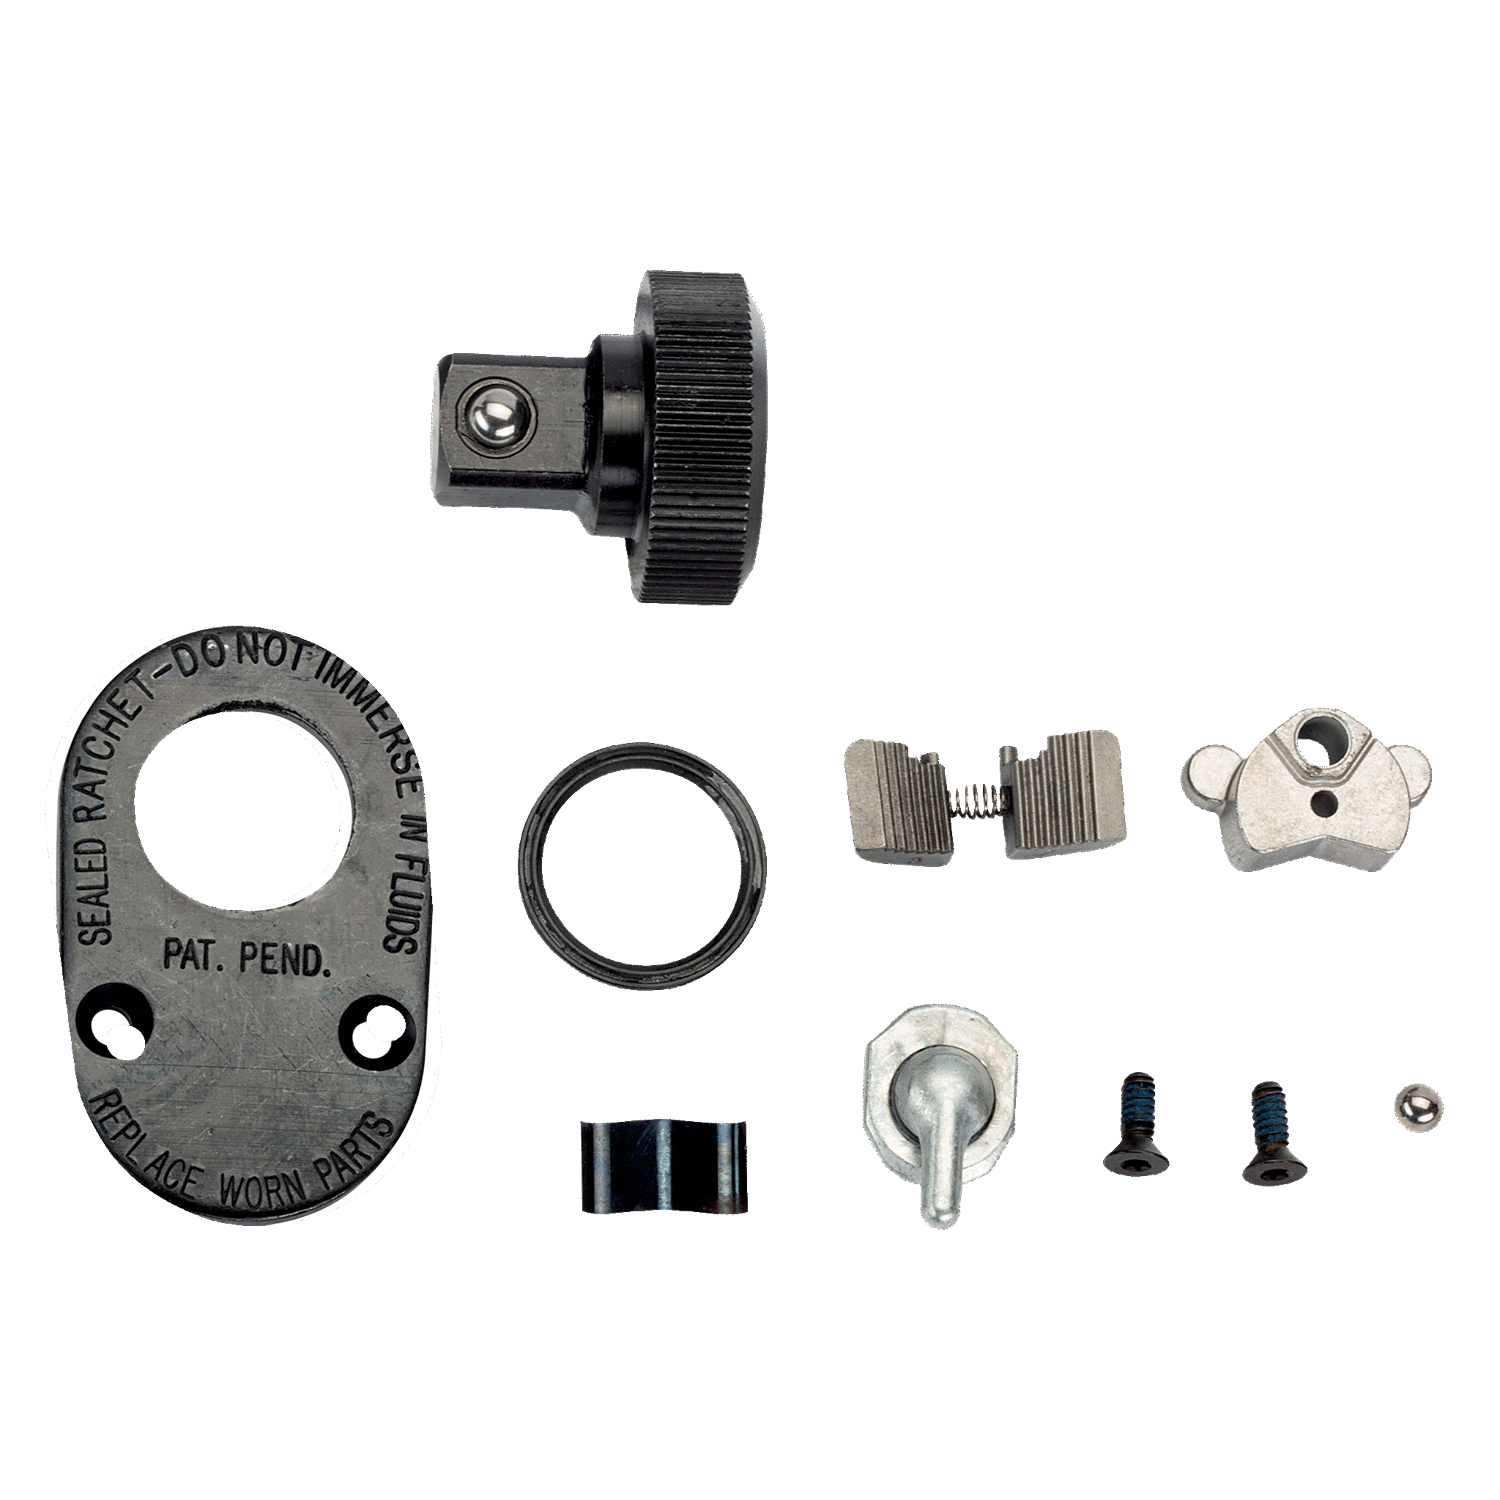 BAHCO 8150-1/2-SPARE Spare Part Ratchet Kit For 8150-1/2 1/2" - Premium Spare Part Ratchet from BAHCO - Shop now at Yew Aik.